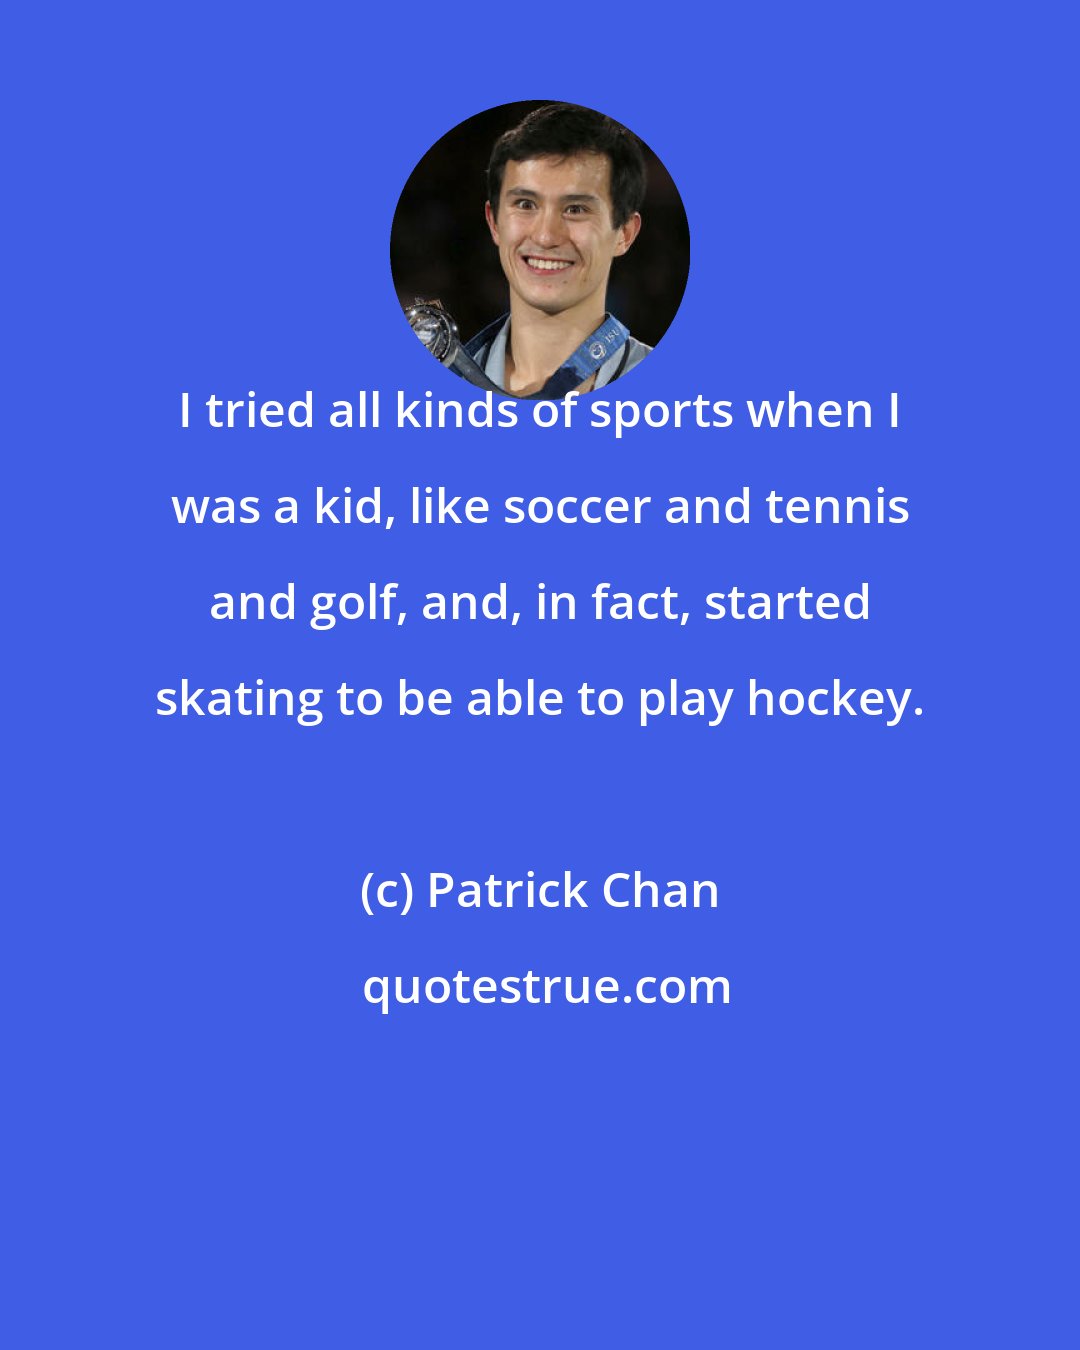 Patrick Chan: I tried all kinds of sports when I was a kid, like soccer and tennis and golf, and, in fact, started skating to be able to play hockey.